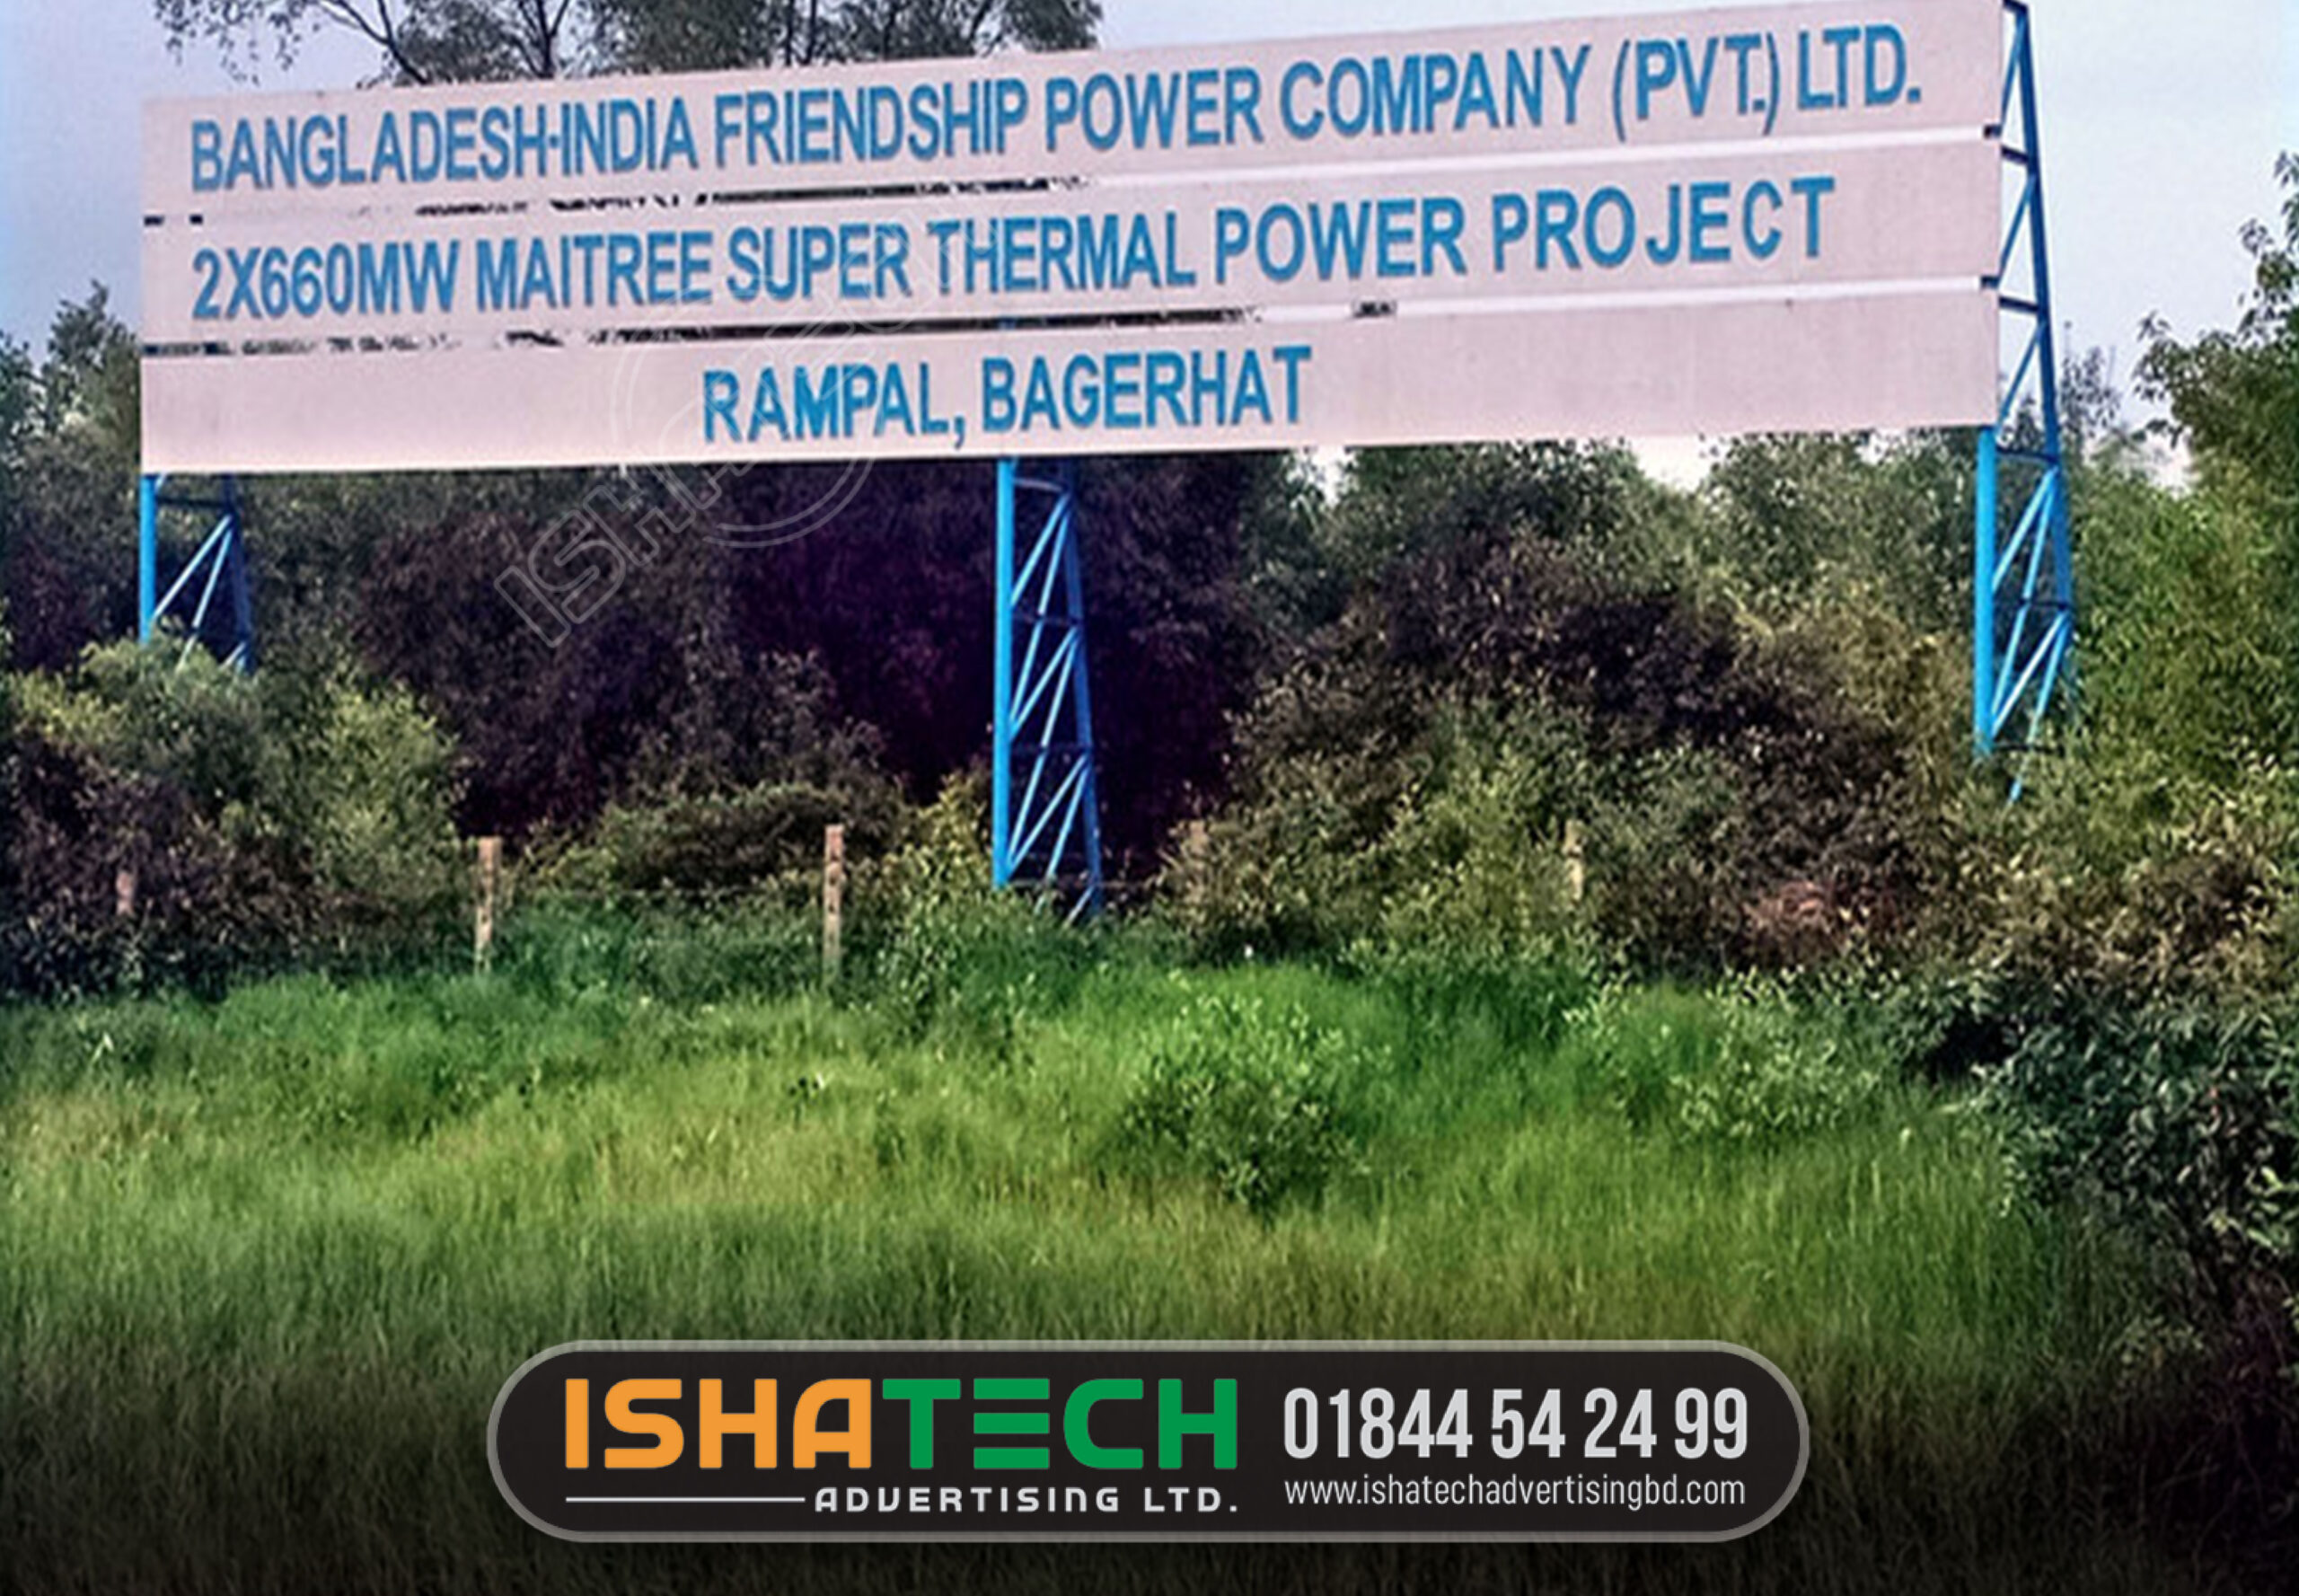 PROJECT SIGNBOARD, PROJECT BILLBOARD CRETED BY ISHATECH ADVERTISING LTD, BANGLADESH FRIENDSHIP POWER COMPANY PVT LTD SIGNBOARD OR BILLBOARD MAKING BY ISHATECH ADVERTISING, SIGNBOARD MANUFACTURER IN DHAKA CHITTAGONG BD